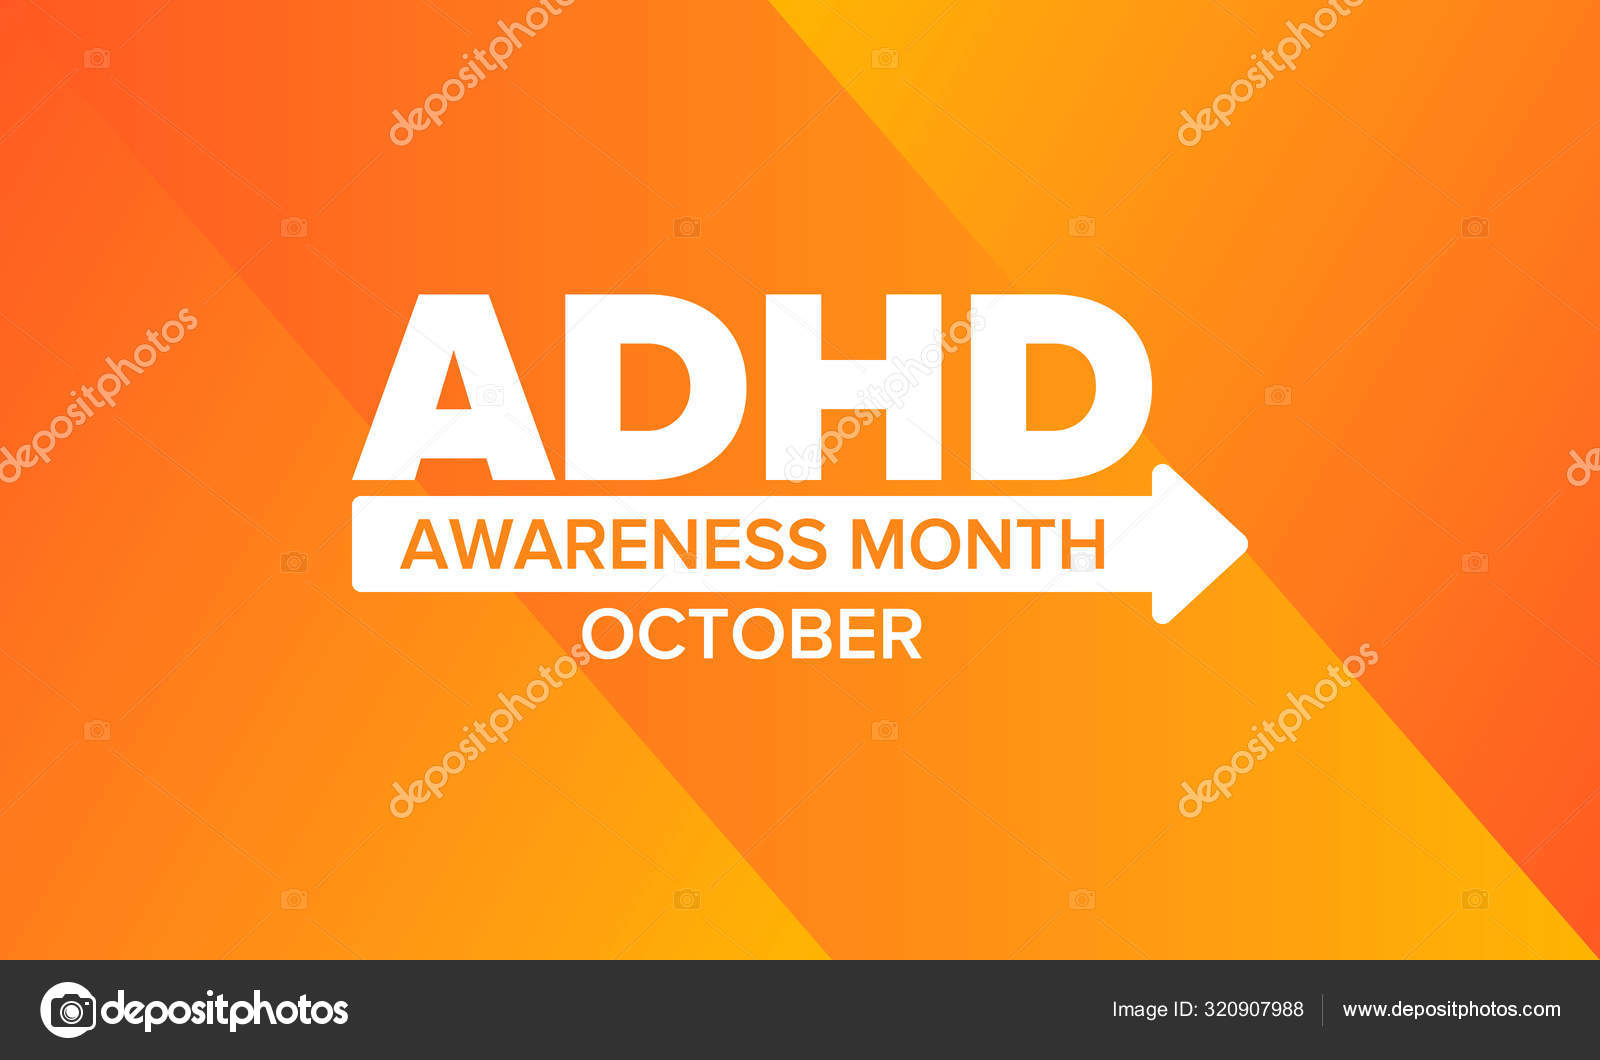 ADHD Awareness - Support Attention Deficit Hyperactivity Disorder Awareness  - ADHD Wristband